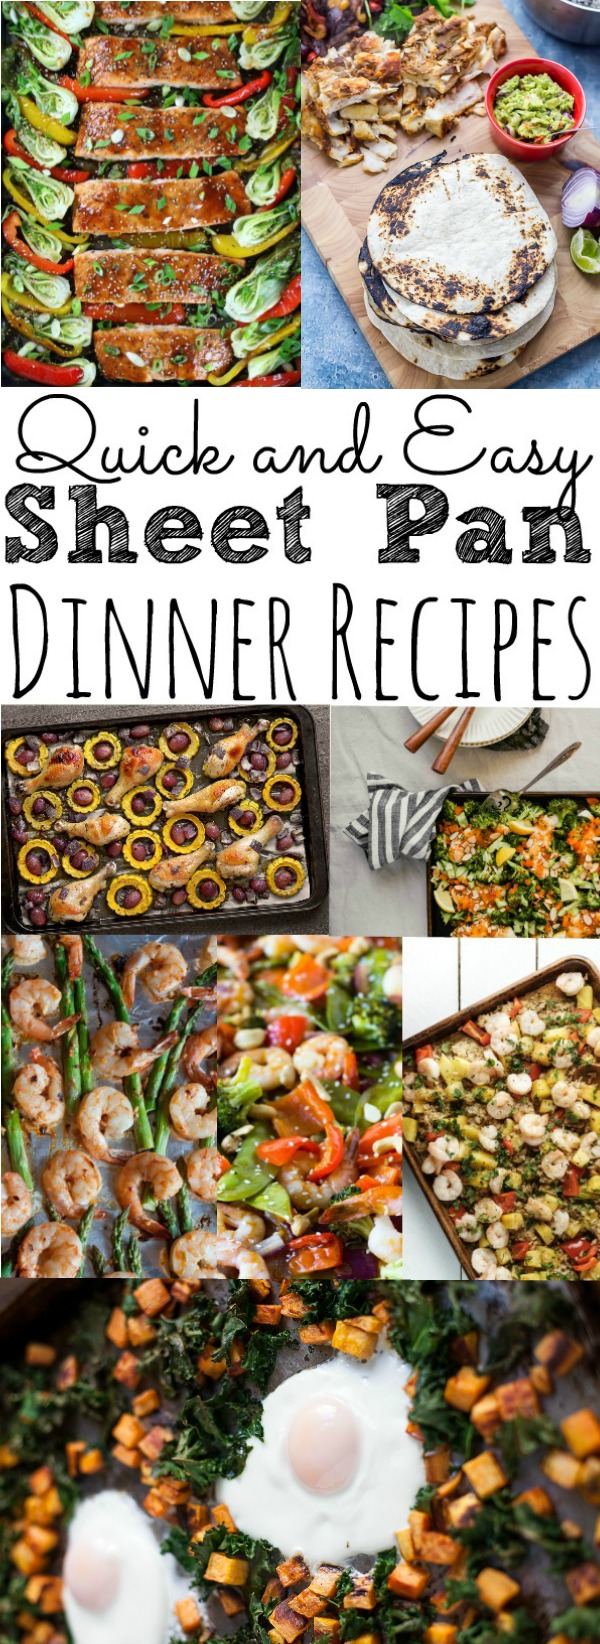 30+ Easy Sheet Pan Dinner Recipes for Families